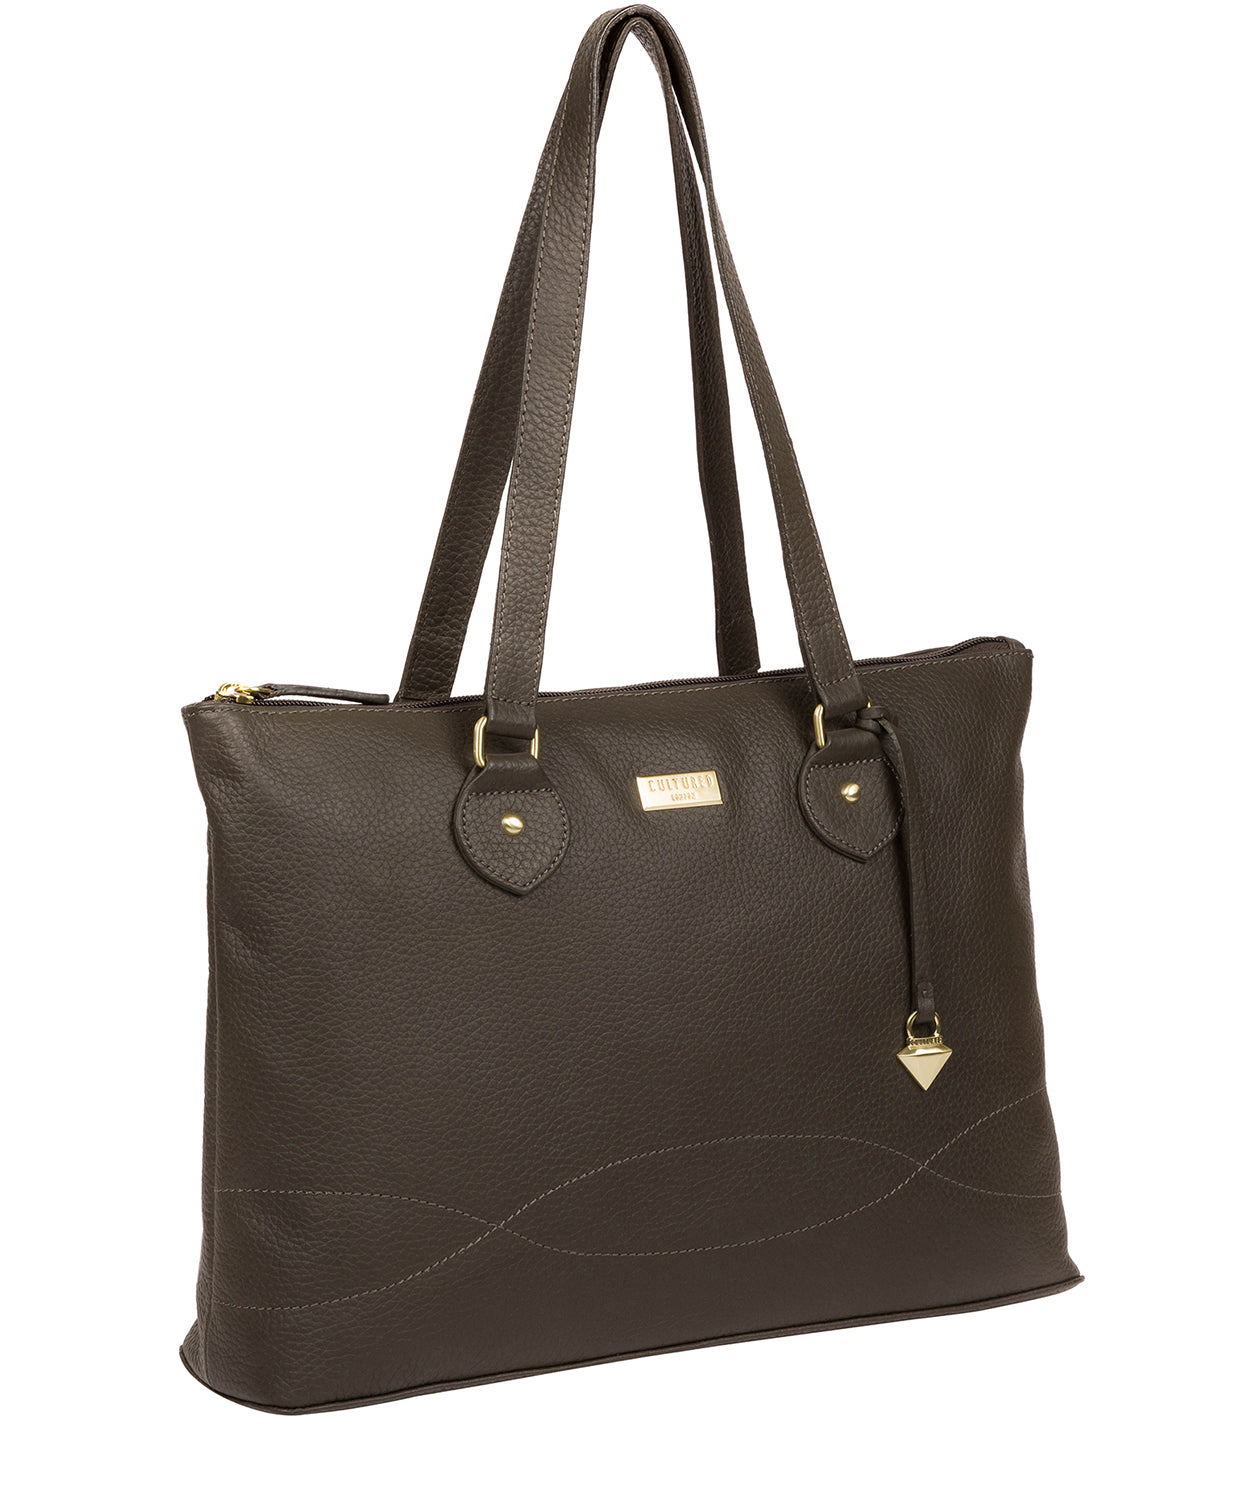 Green Leather Tote Bag 'Idelle' by Cultured London – Pure Luxuries London